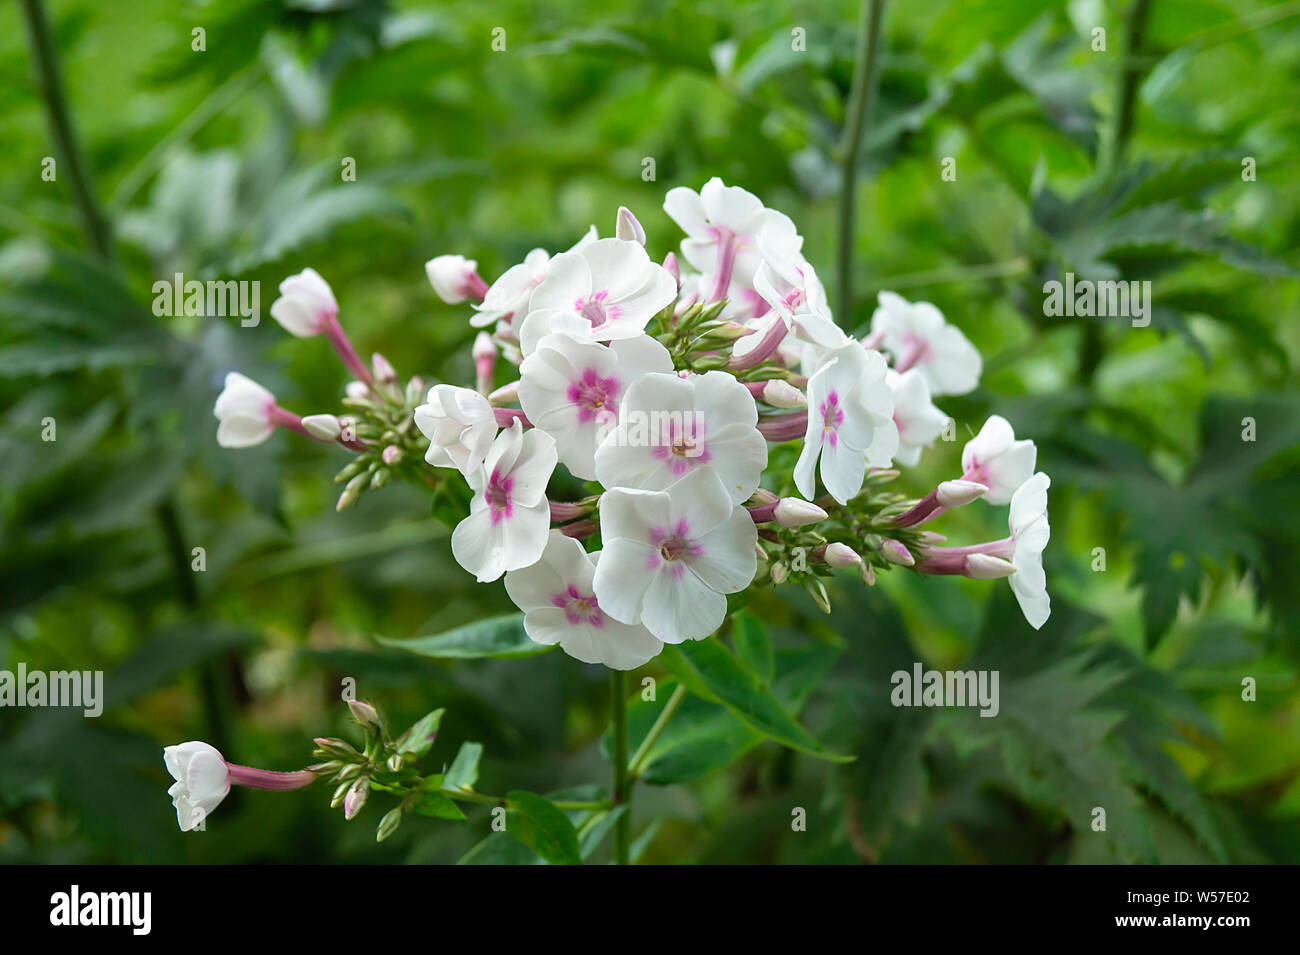 White flower of the phlox on background green sheet grows in year garden Stock Photo